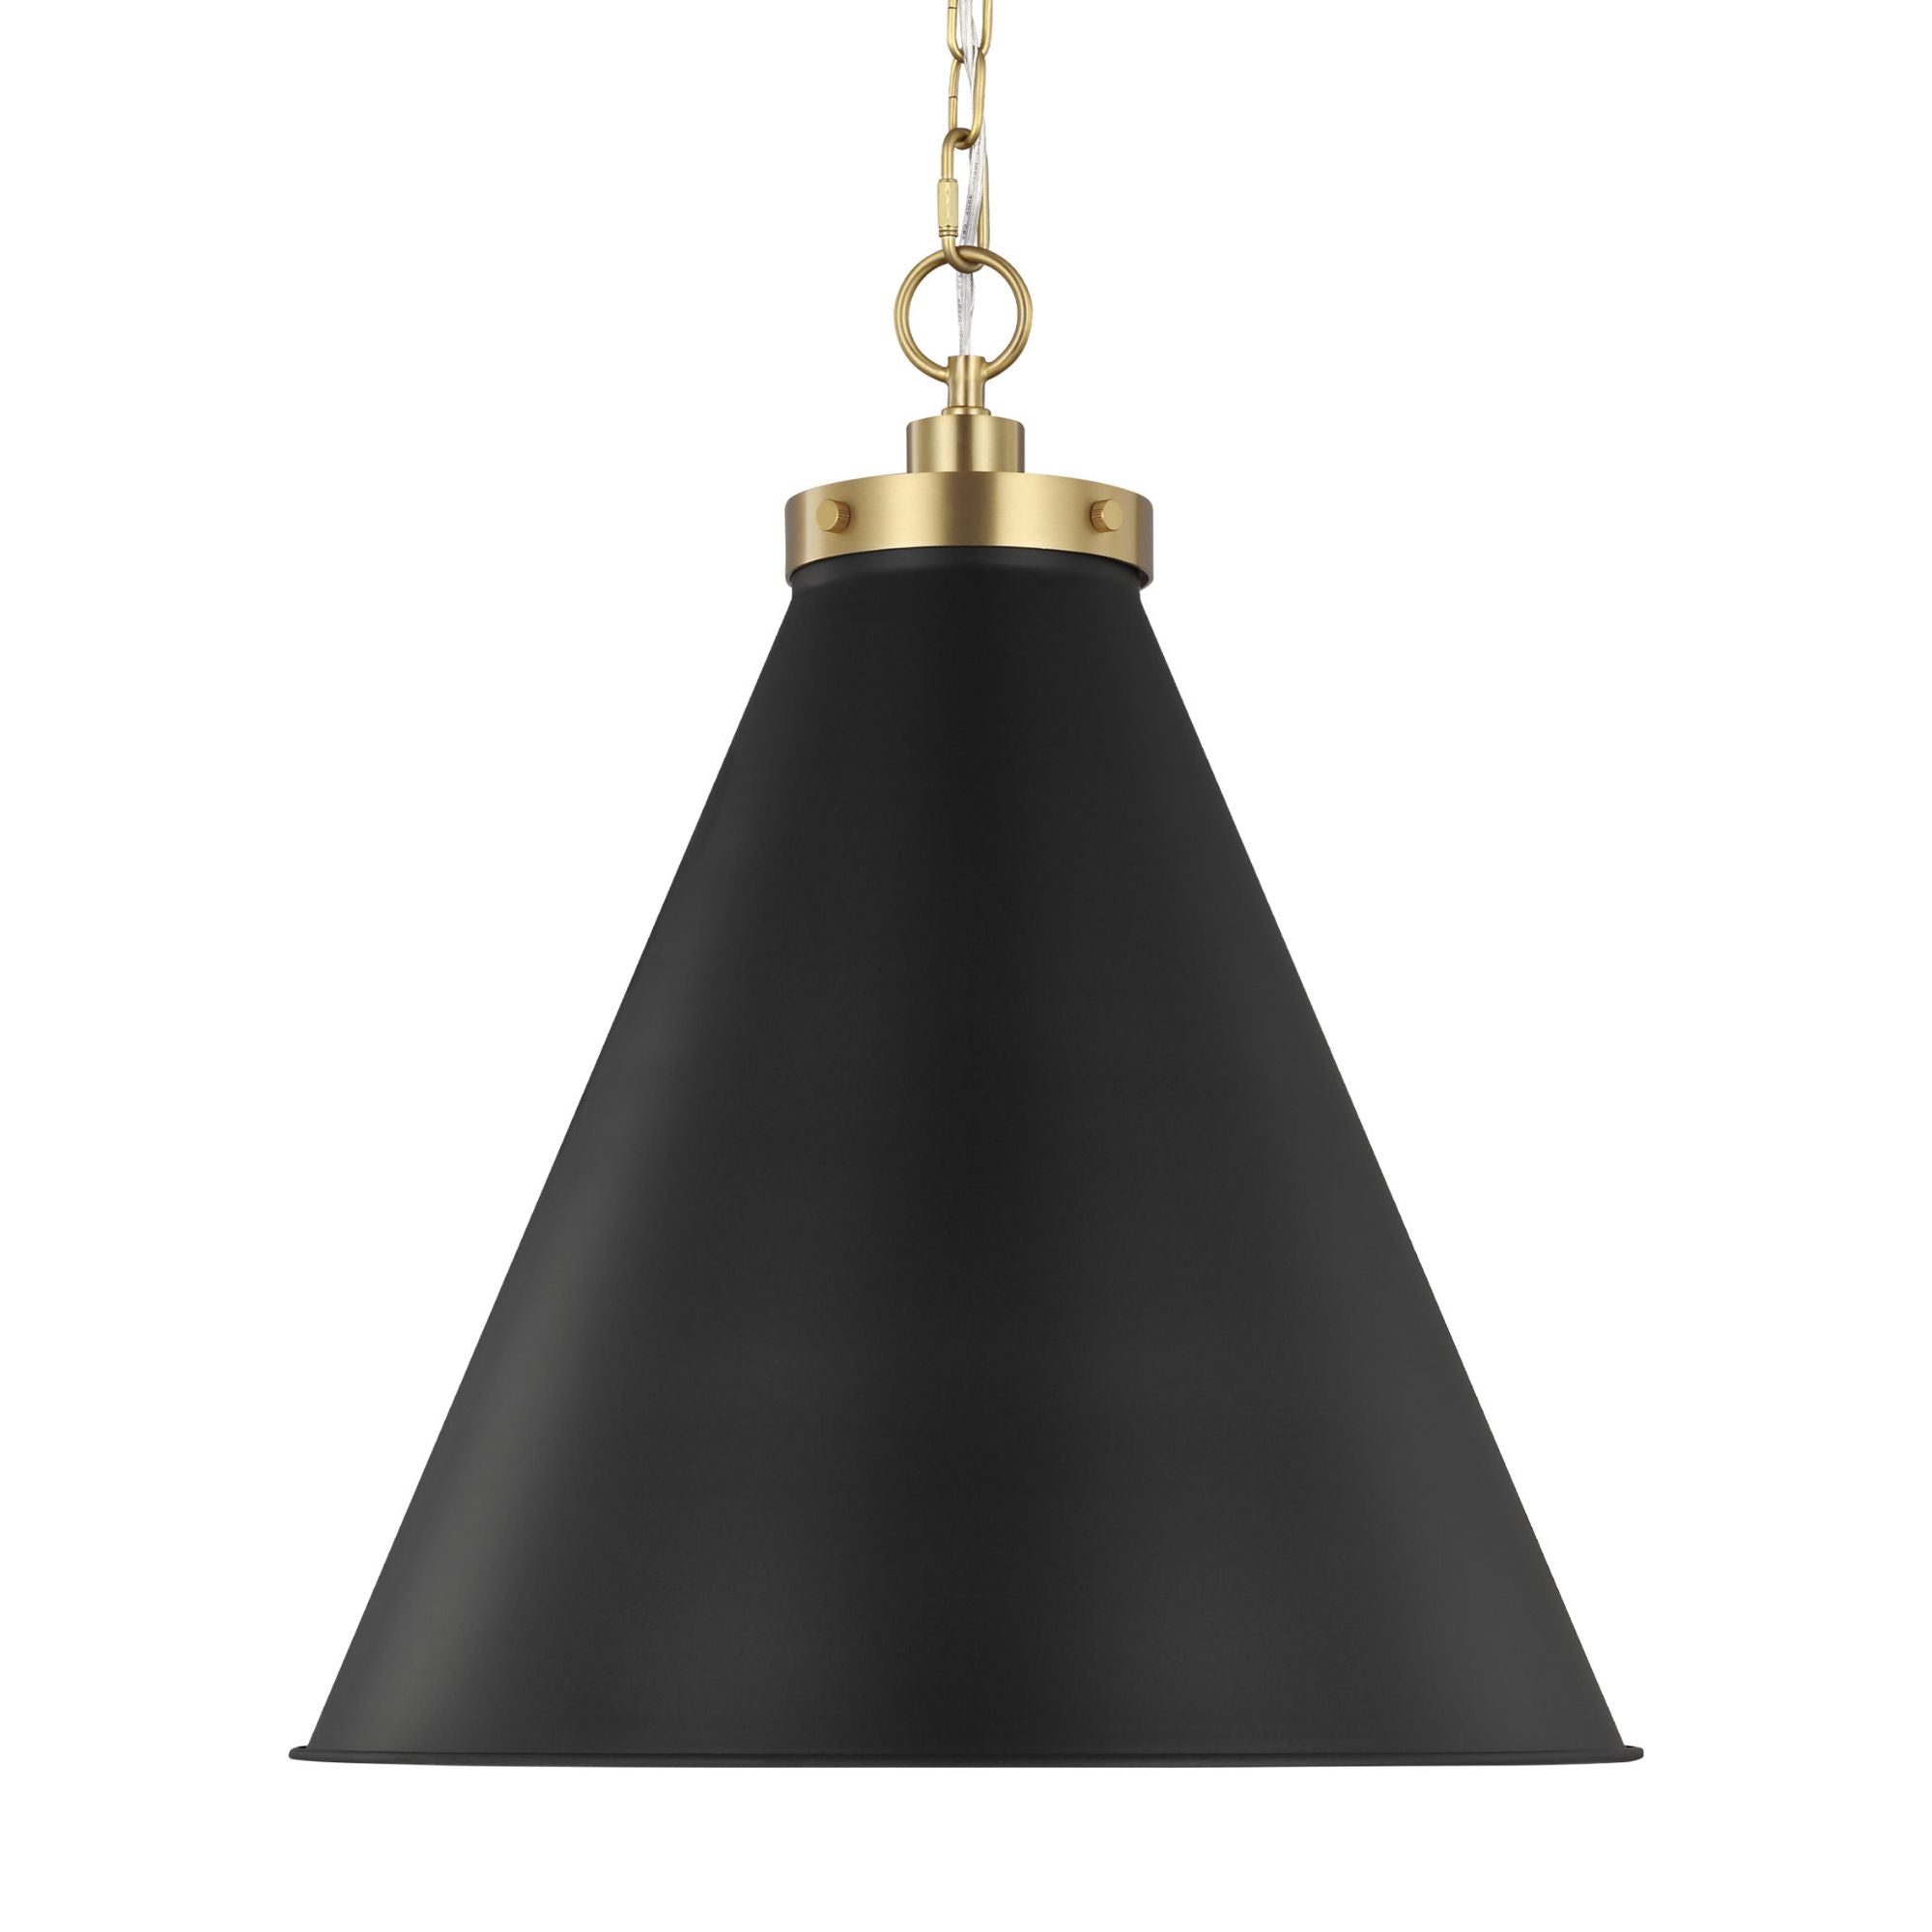 Chapman & Myers Wellfleet Large Cone Pendant in Midnight Black and Burnished Brass